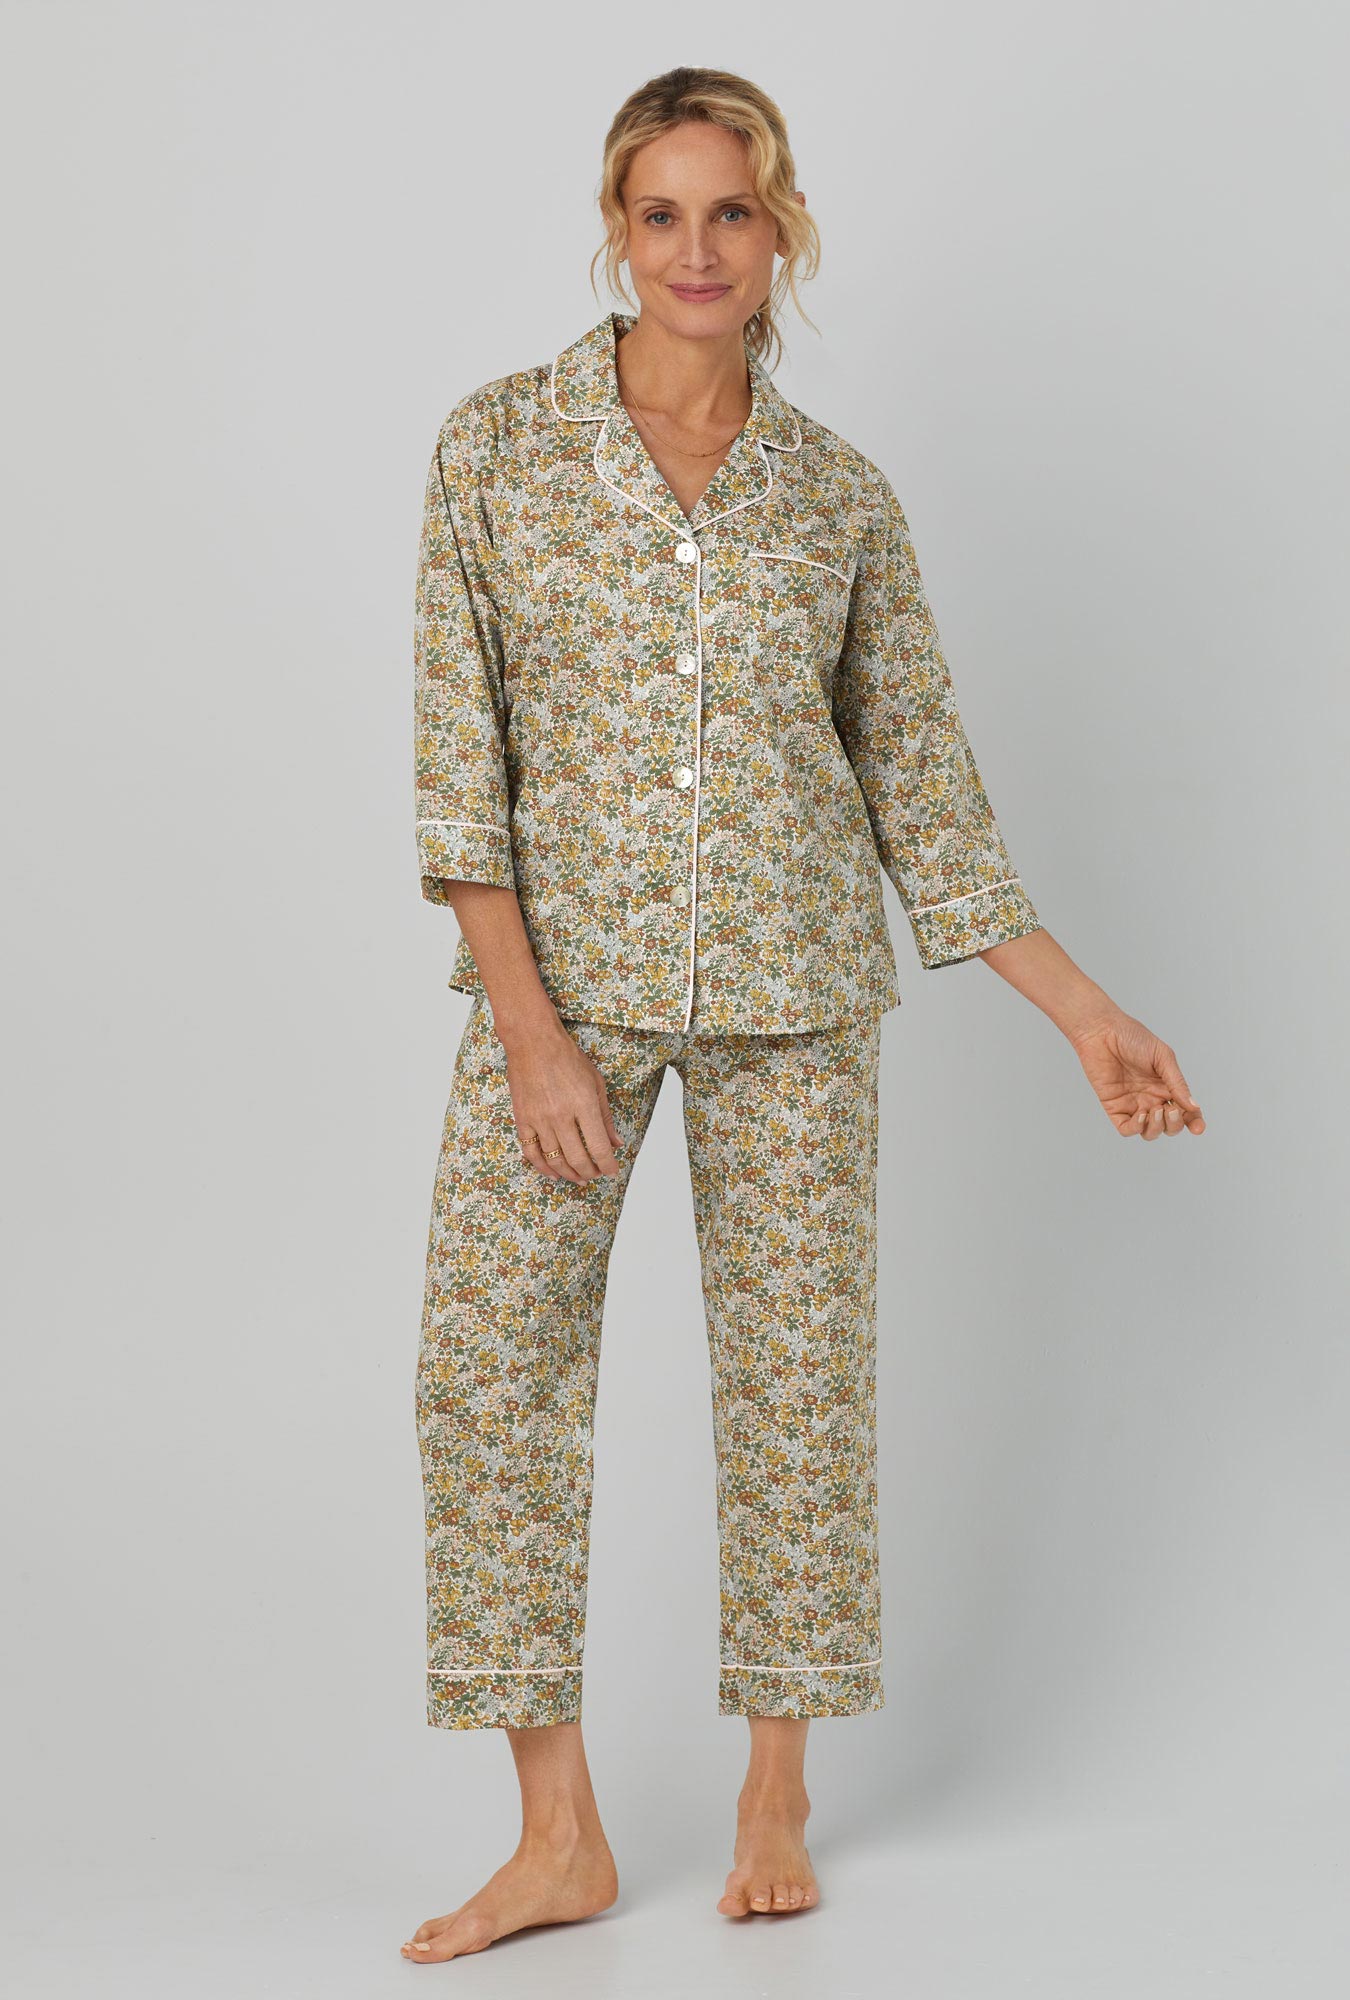 A lady wearing green 3/4 Sleeve Classic Woven Cotton Cropped PJ Set with Penstemon print